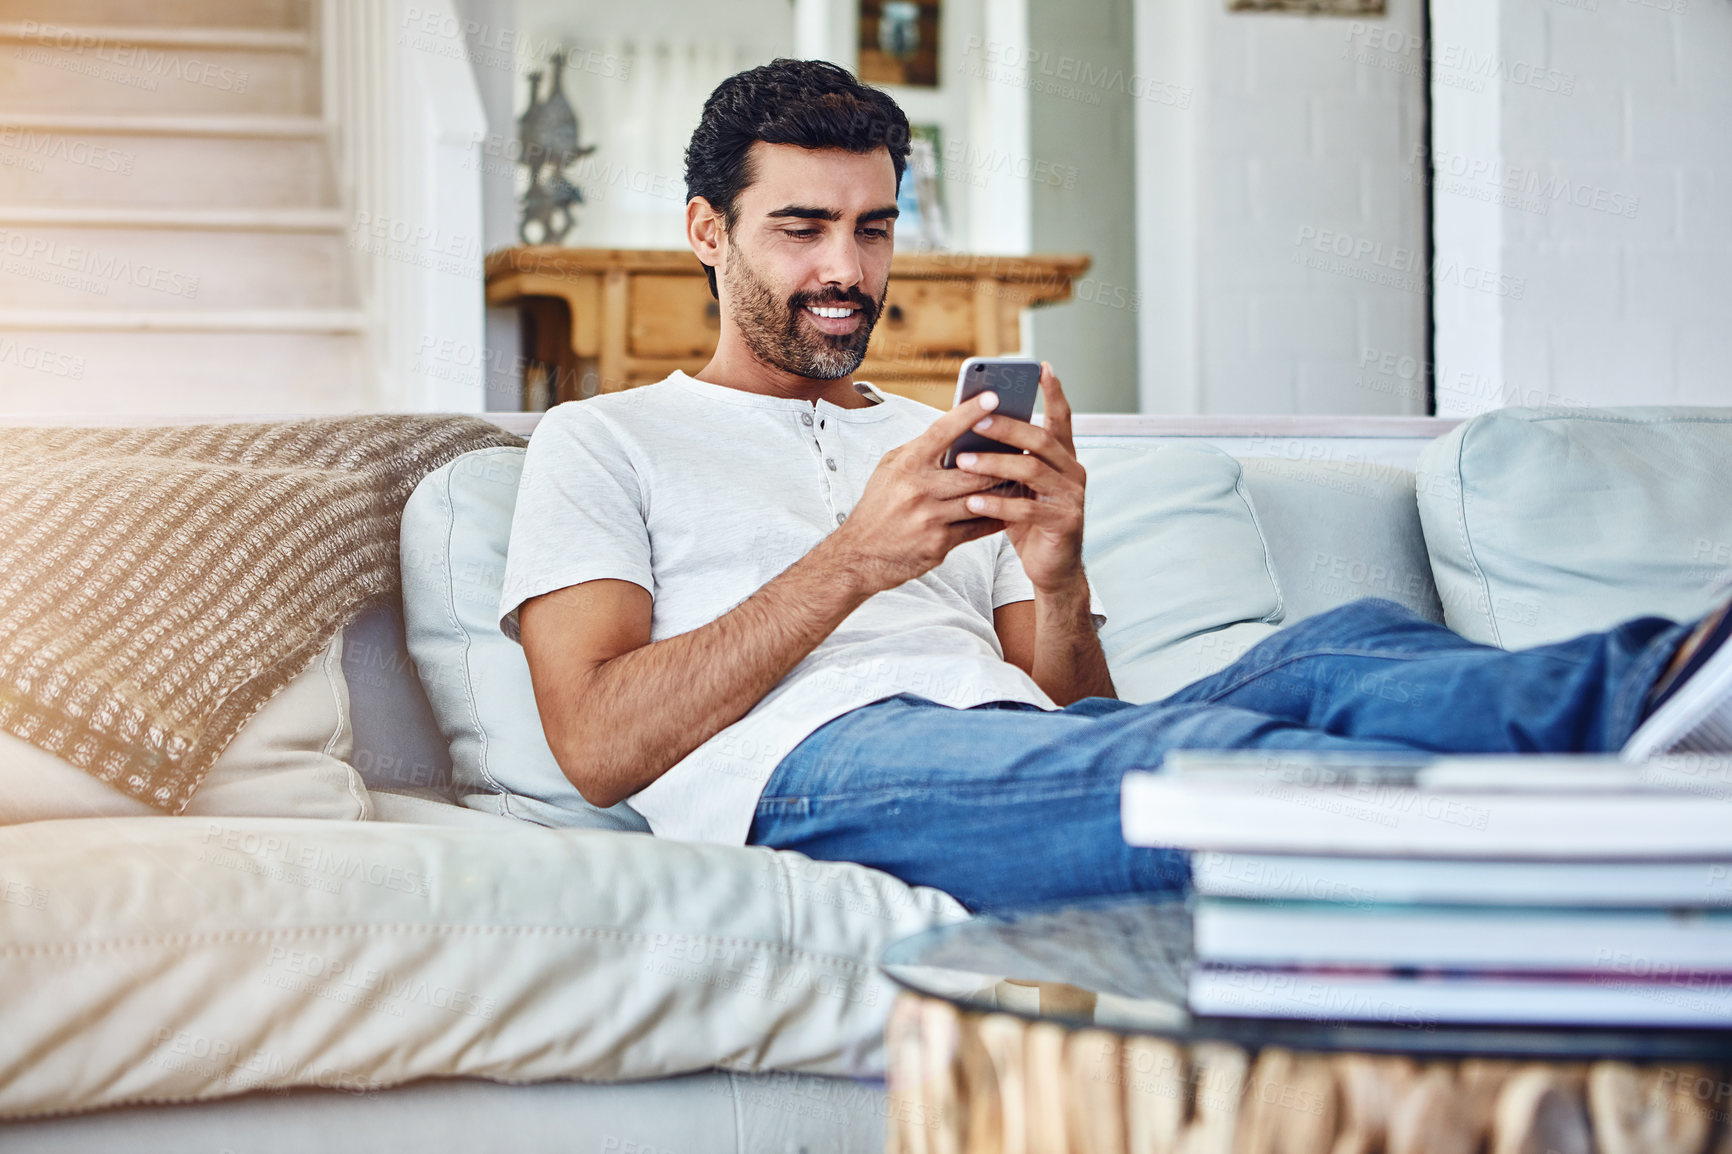 Buy stock photo Online, mobile and man texting on sofa for social media, communication or notification in living room. Contact, connection and person with smartphone for typing, networking or internet app in home